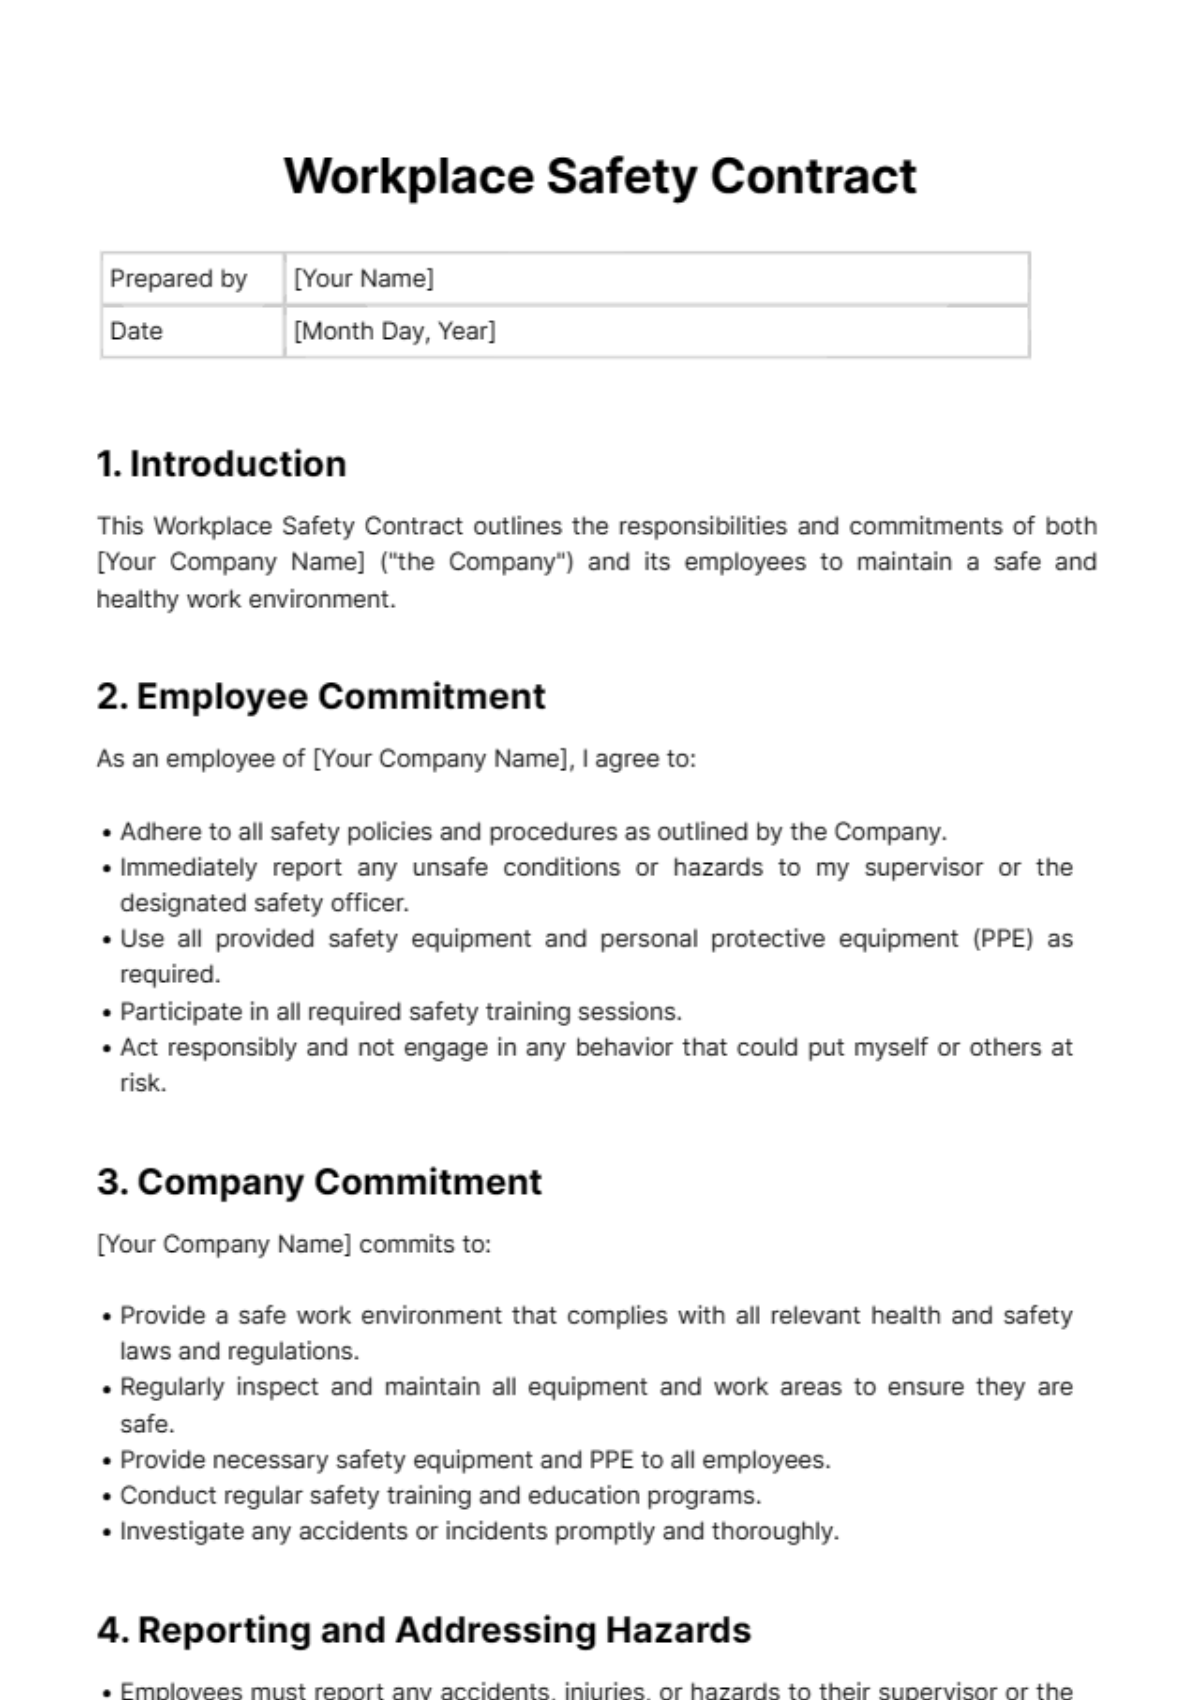 Workplace Safety Contract Template